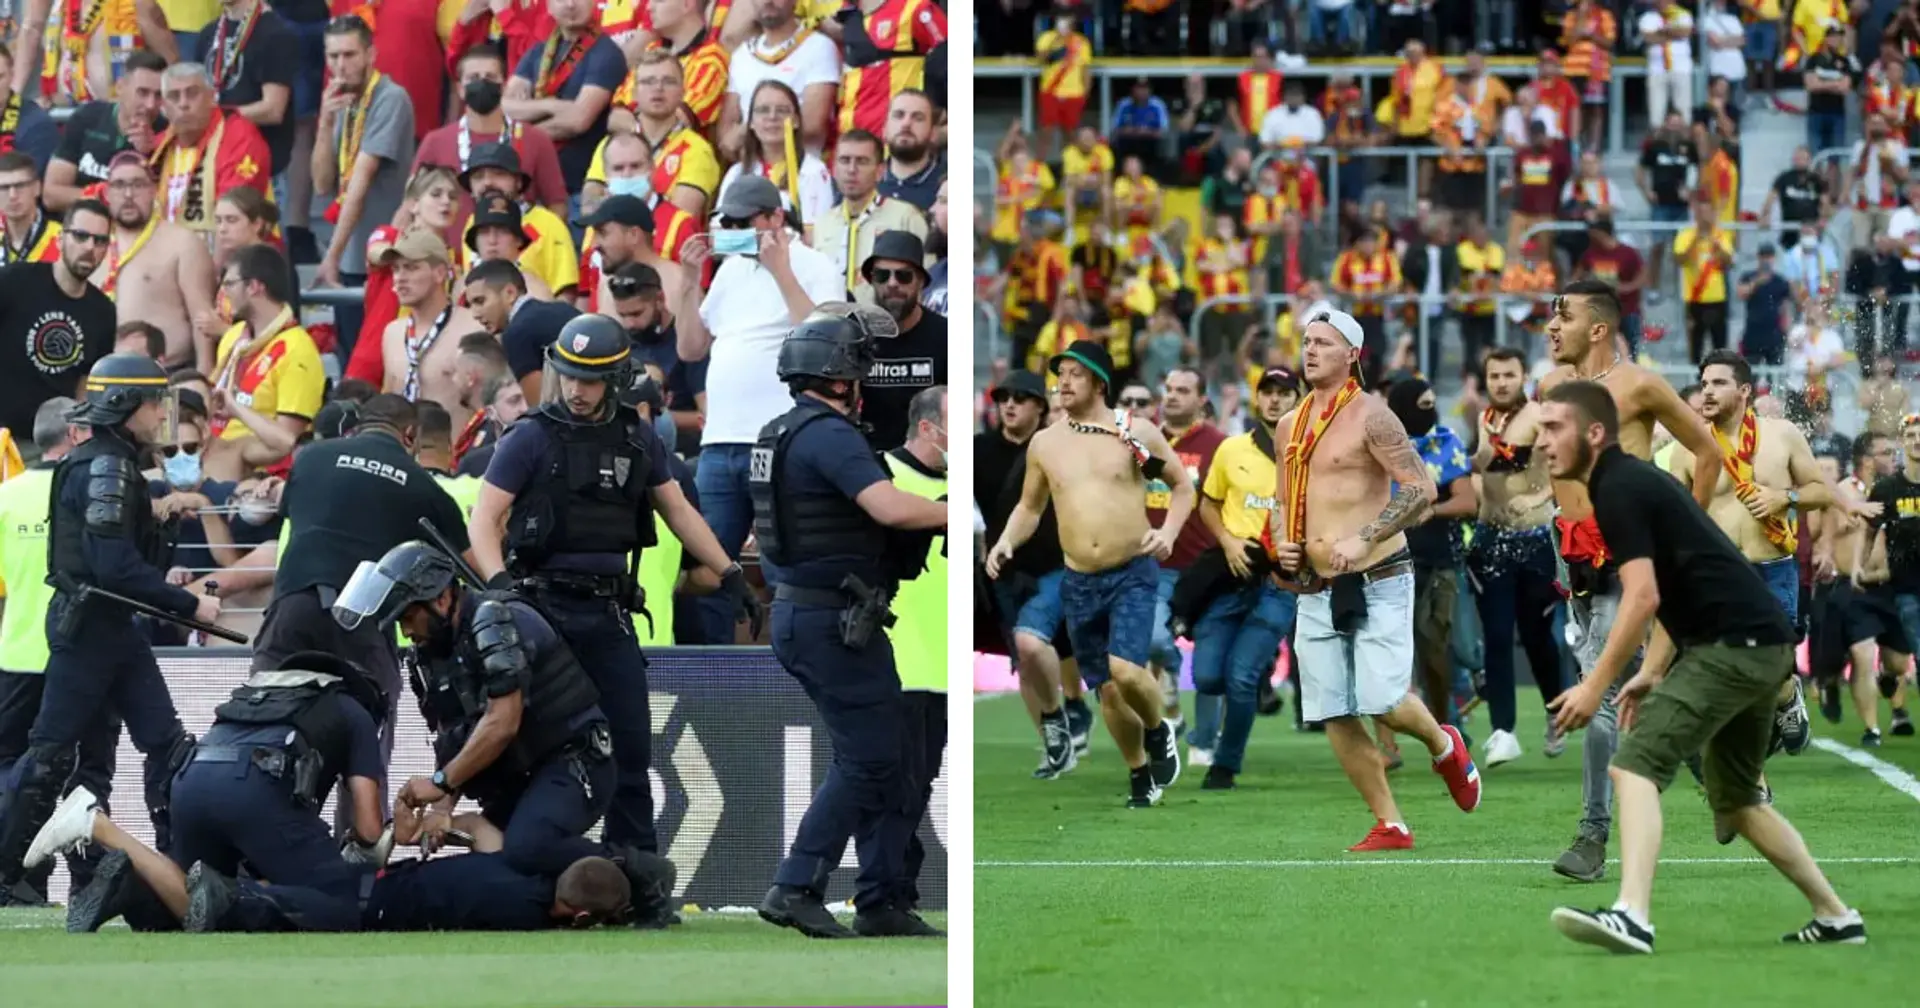 Lens vs Lille game stopped after fan invade pitch, riot police called to calm situation